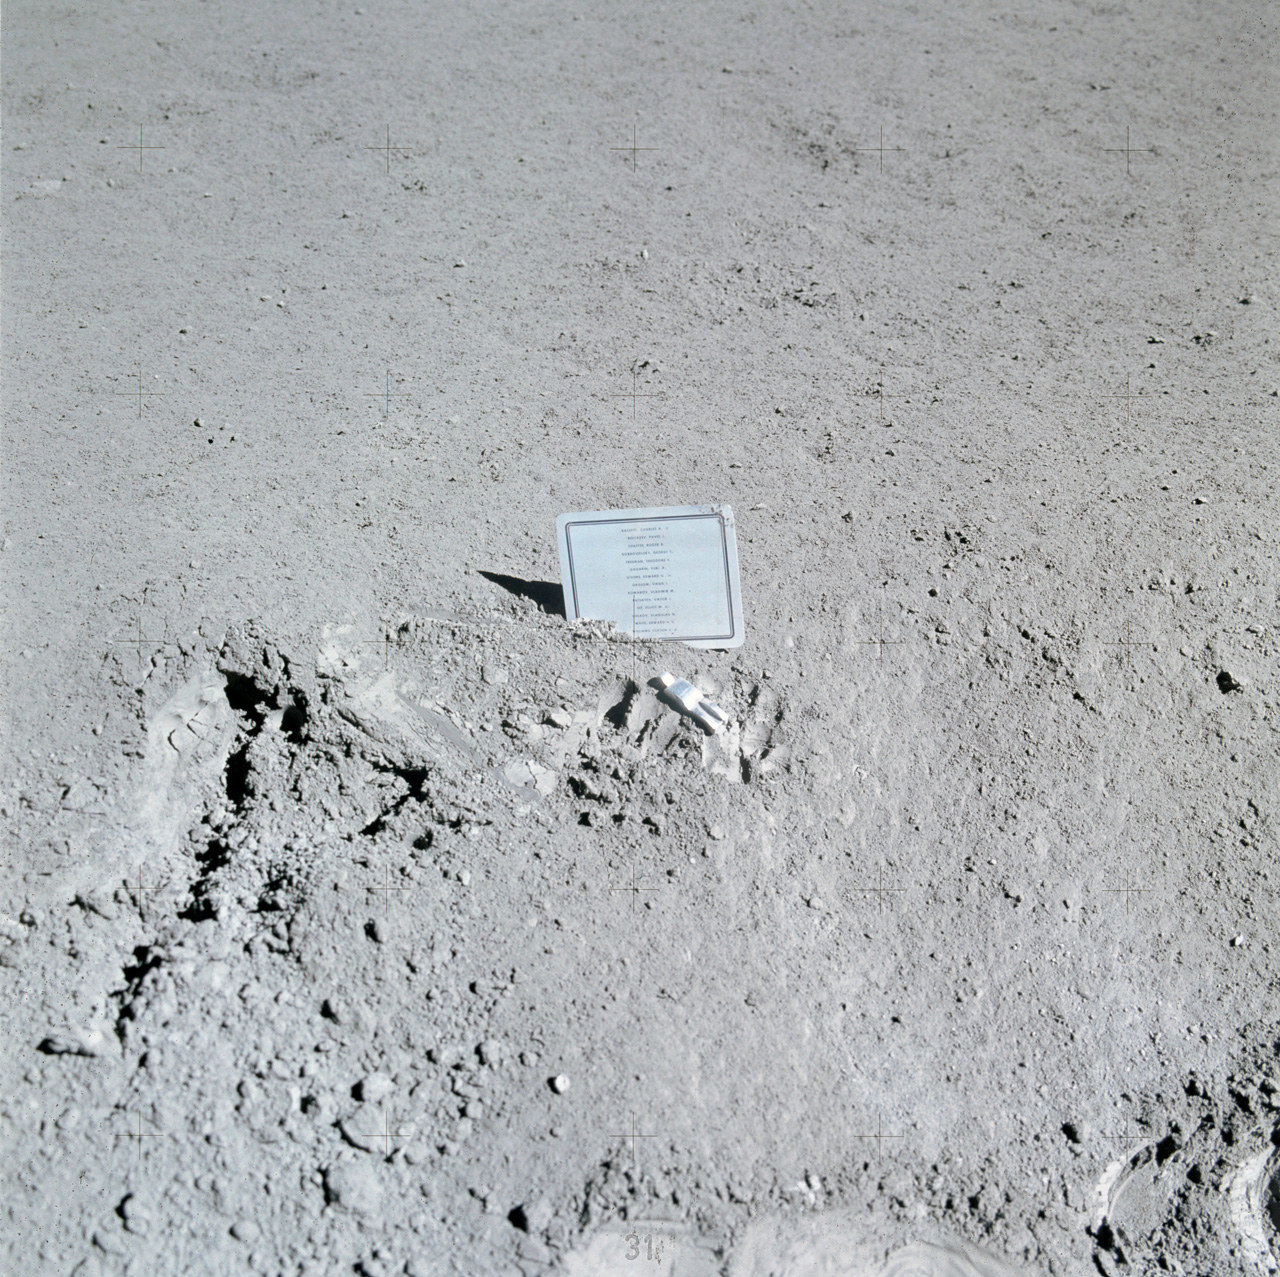 A small metal plaque stuck simply in moon dirt